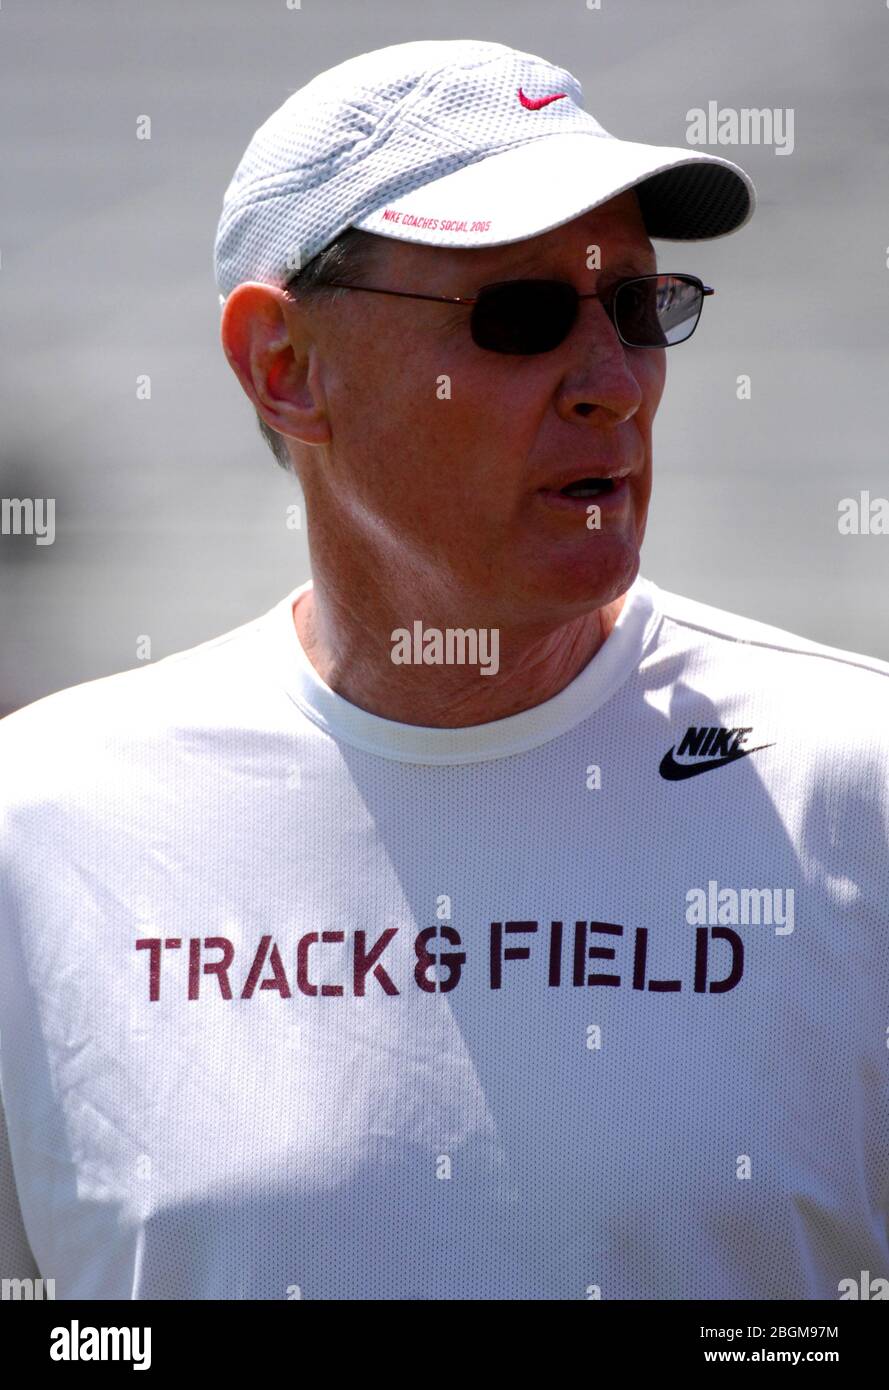 Austin, United States. 05th Apr, 2007. Washington State coach Rick Sloan watches heptathlon competition at the 80th Clyde Littlefield Texas Relays at Mike A. Myers Stadium in Austin, Tex. on Thursday, April 5, 2007. Photo via Credit: Newscom/Alamy Live News Stock Photo